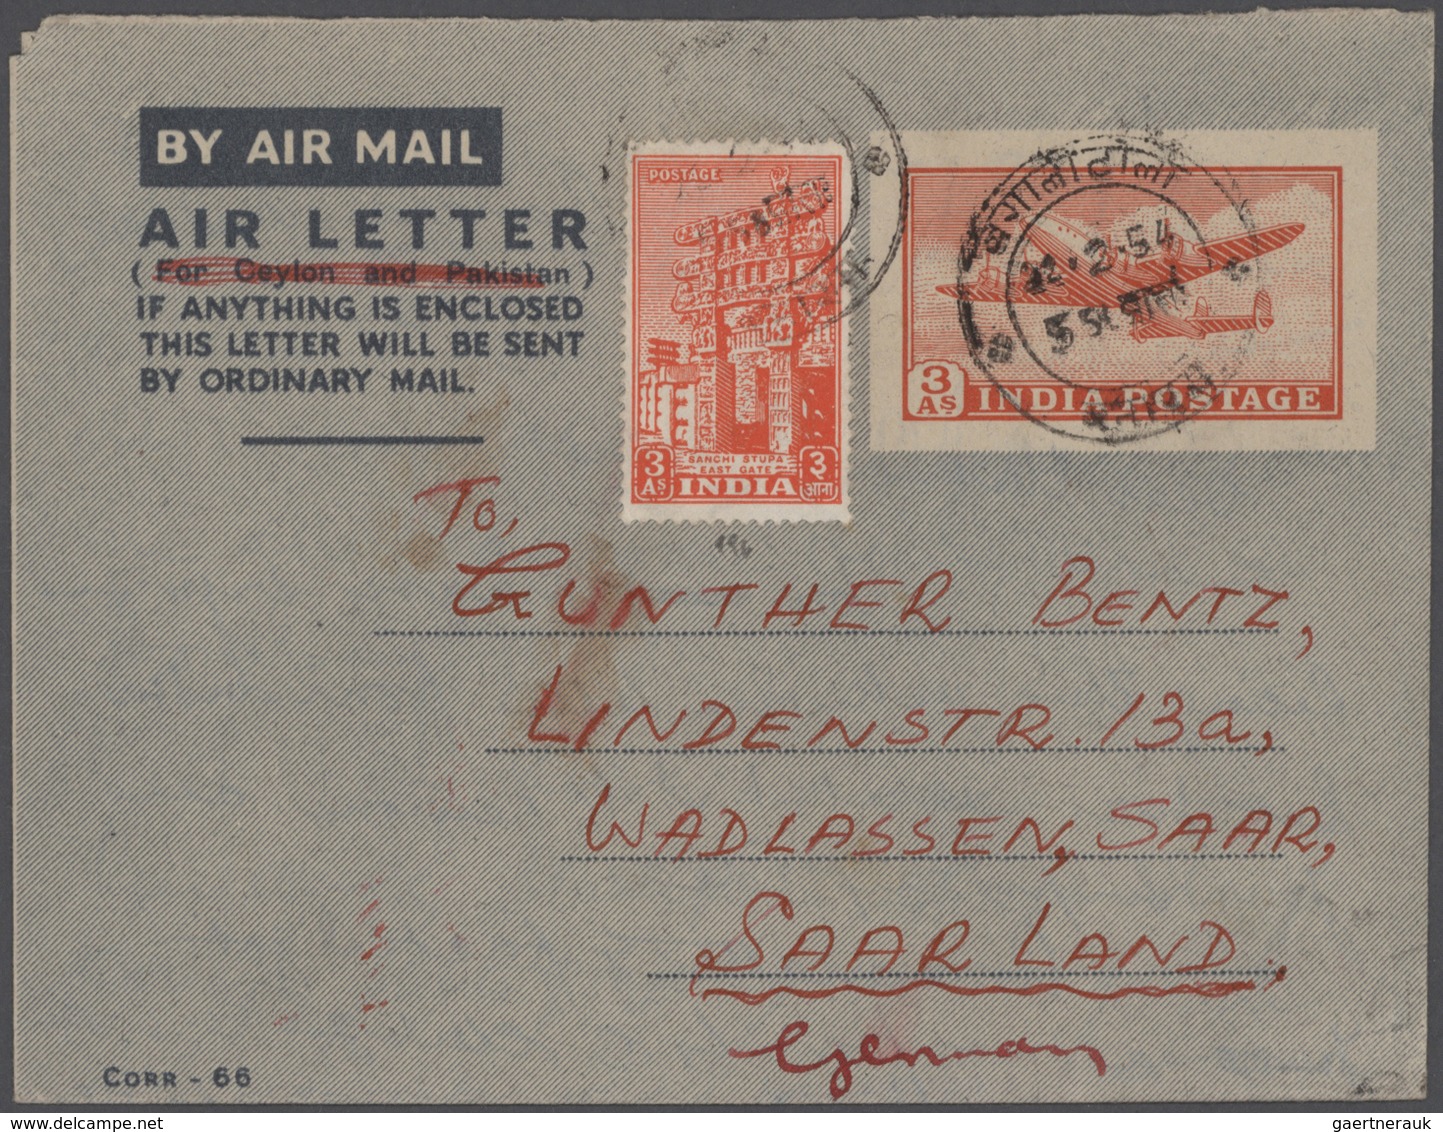 Indien: 1947 Onwards: About 500 Covers, Postcards And Postal Stationery Items, From Independence To - 1854 Britische Indien-Kompanie